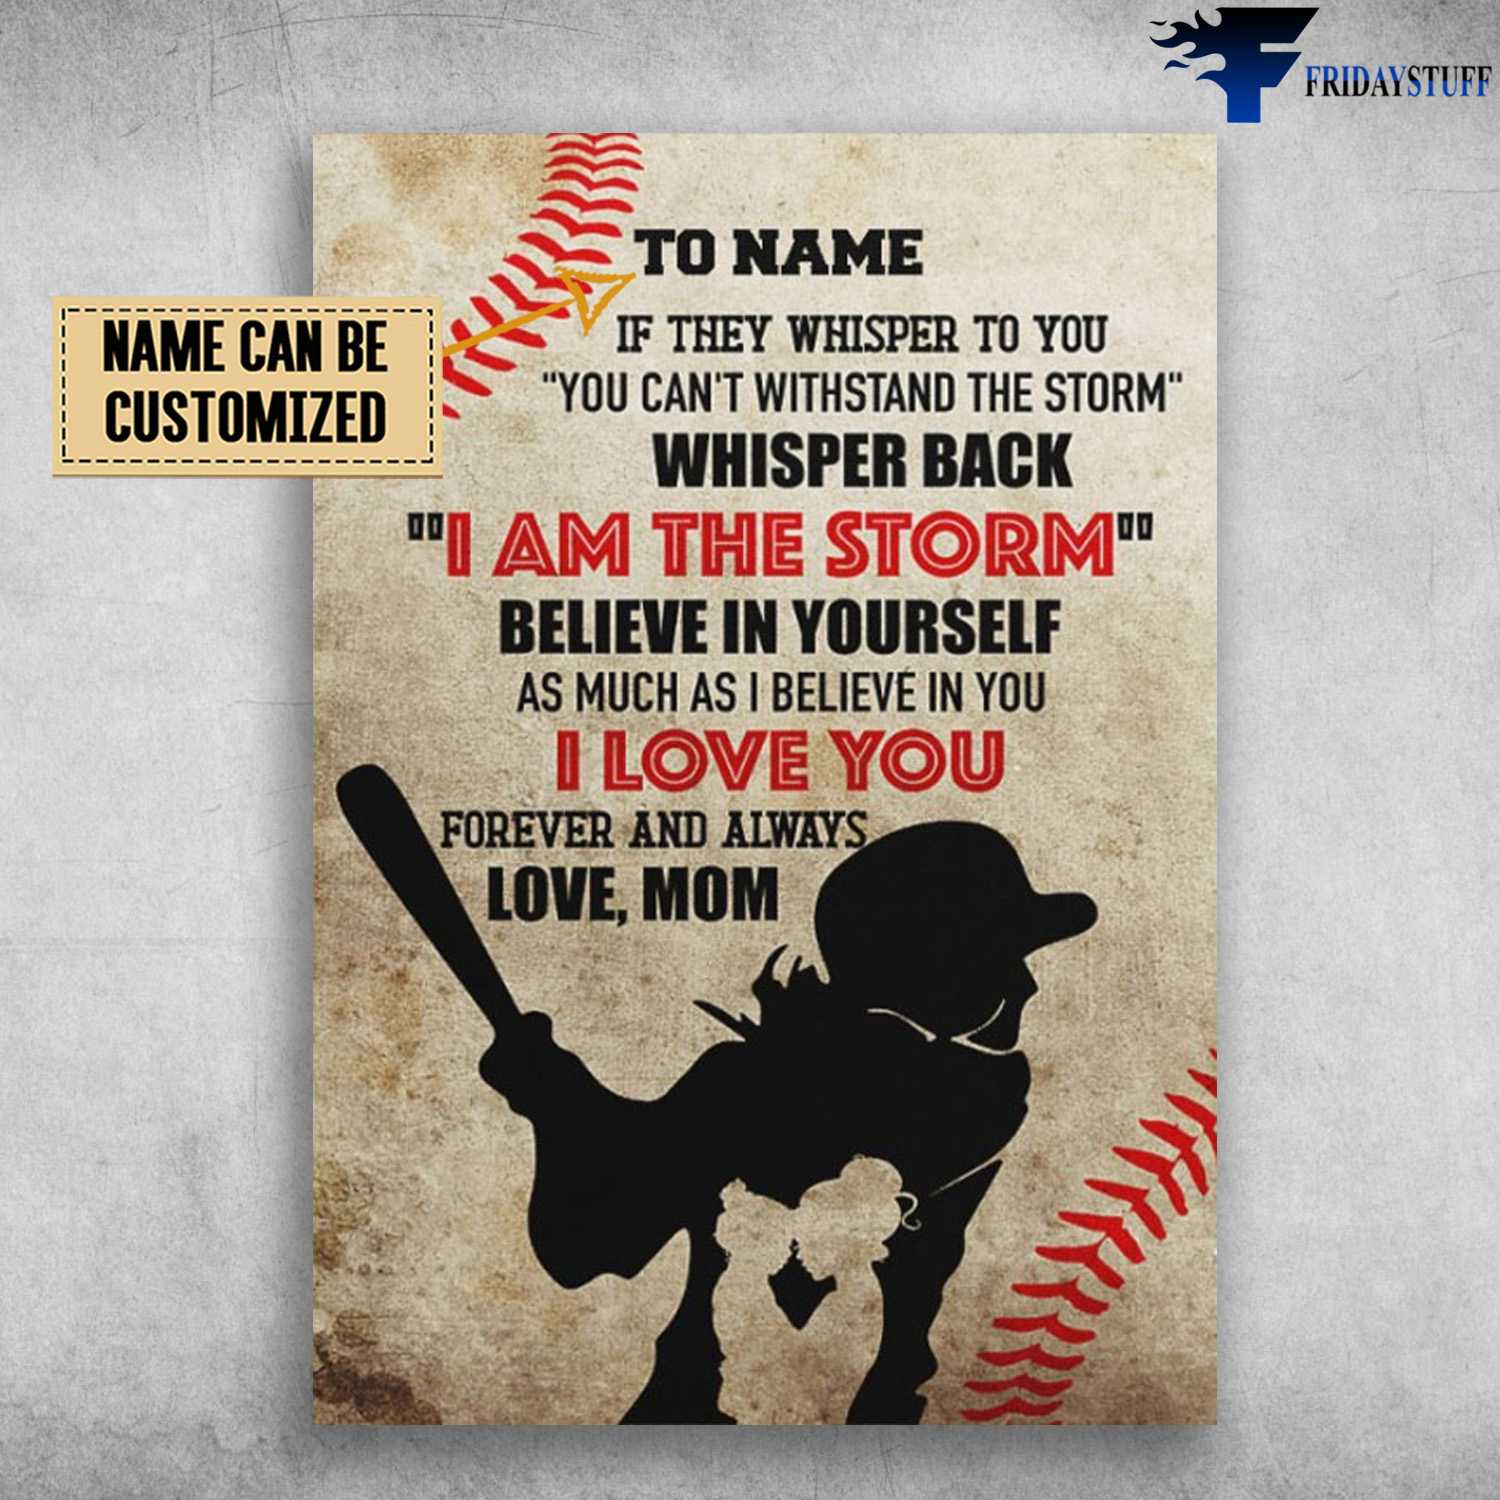 Baseball Daughter, Mom And Daughter, If They Whisper You, You Can't Withstand The Storm, Whisper Back, I Am The Storm, Believe In Yourself, As Much As Believe In You, I Love You